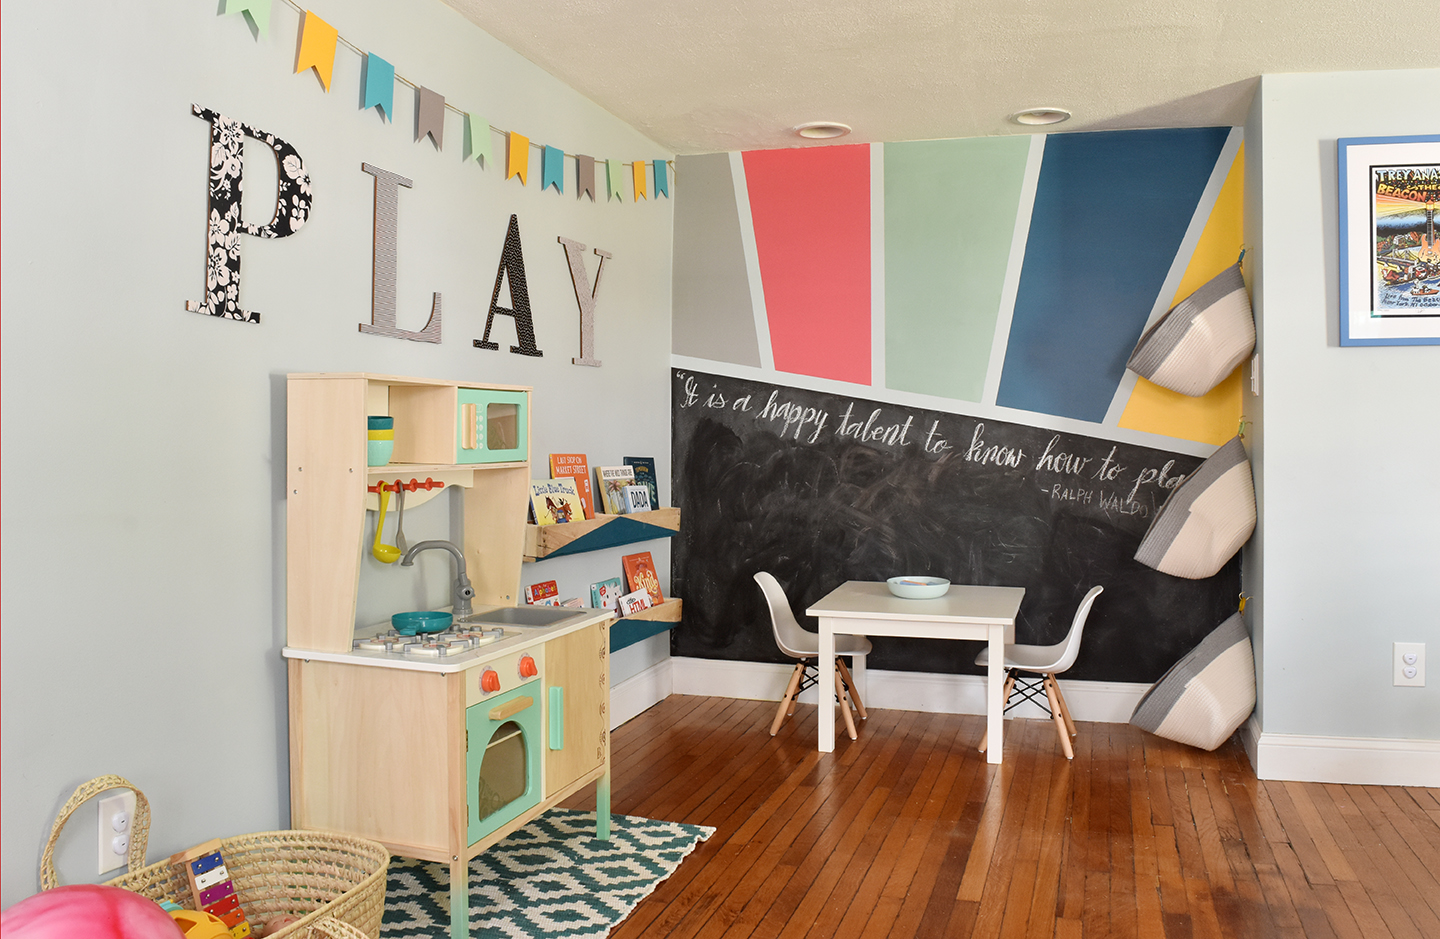 Playroom Update: Easy DIY Fabric-Covered Wooden Letters | Design Fixation